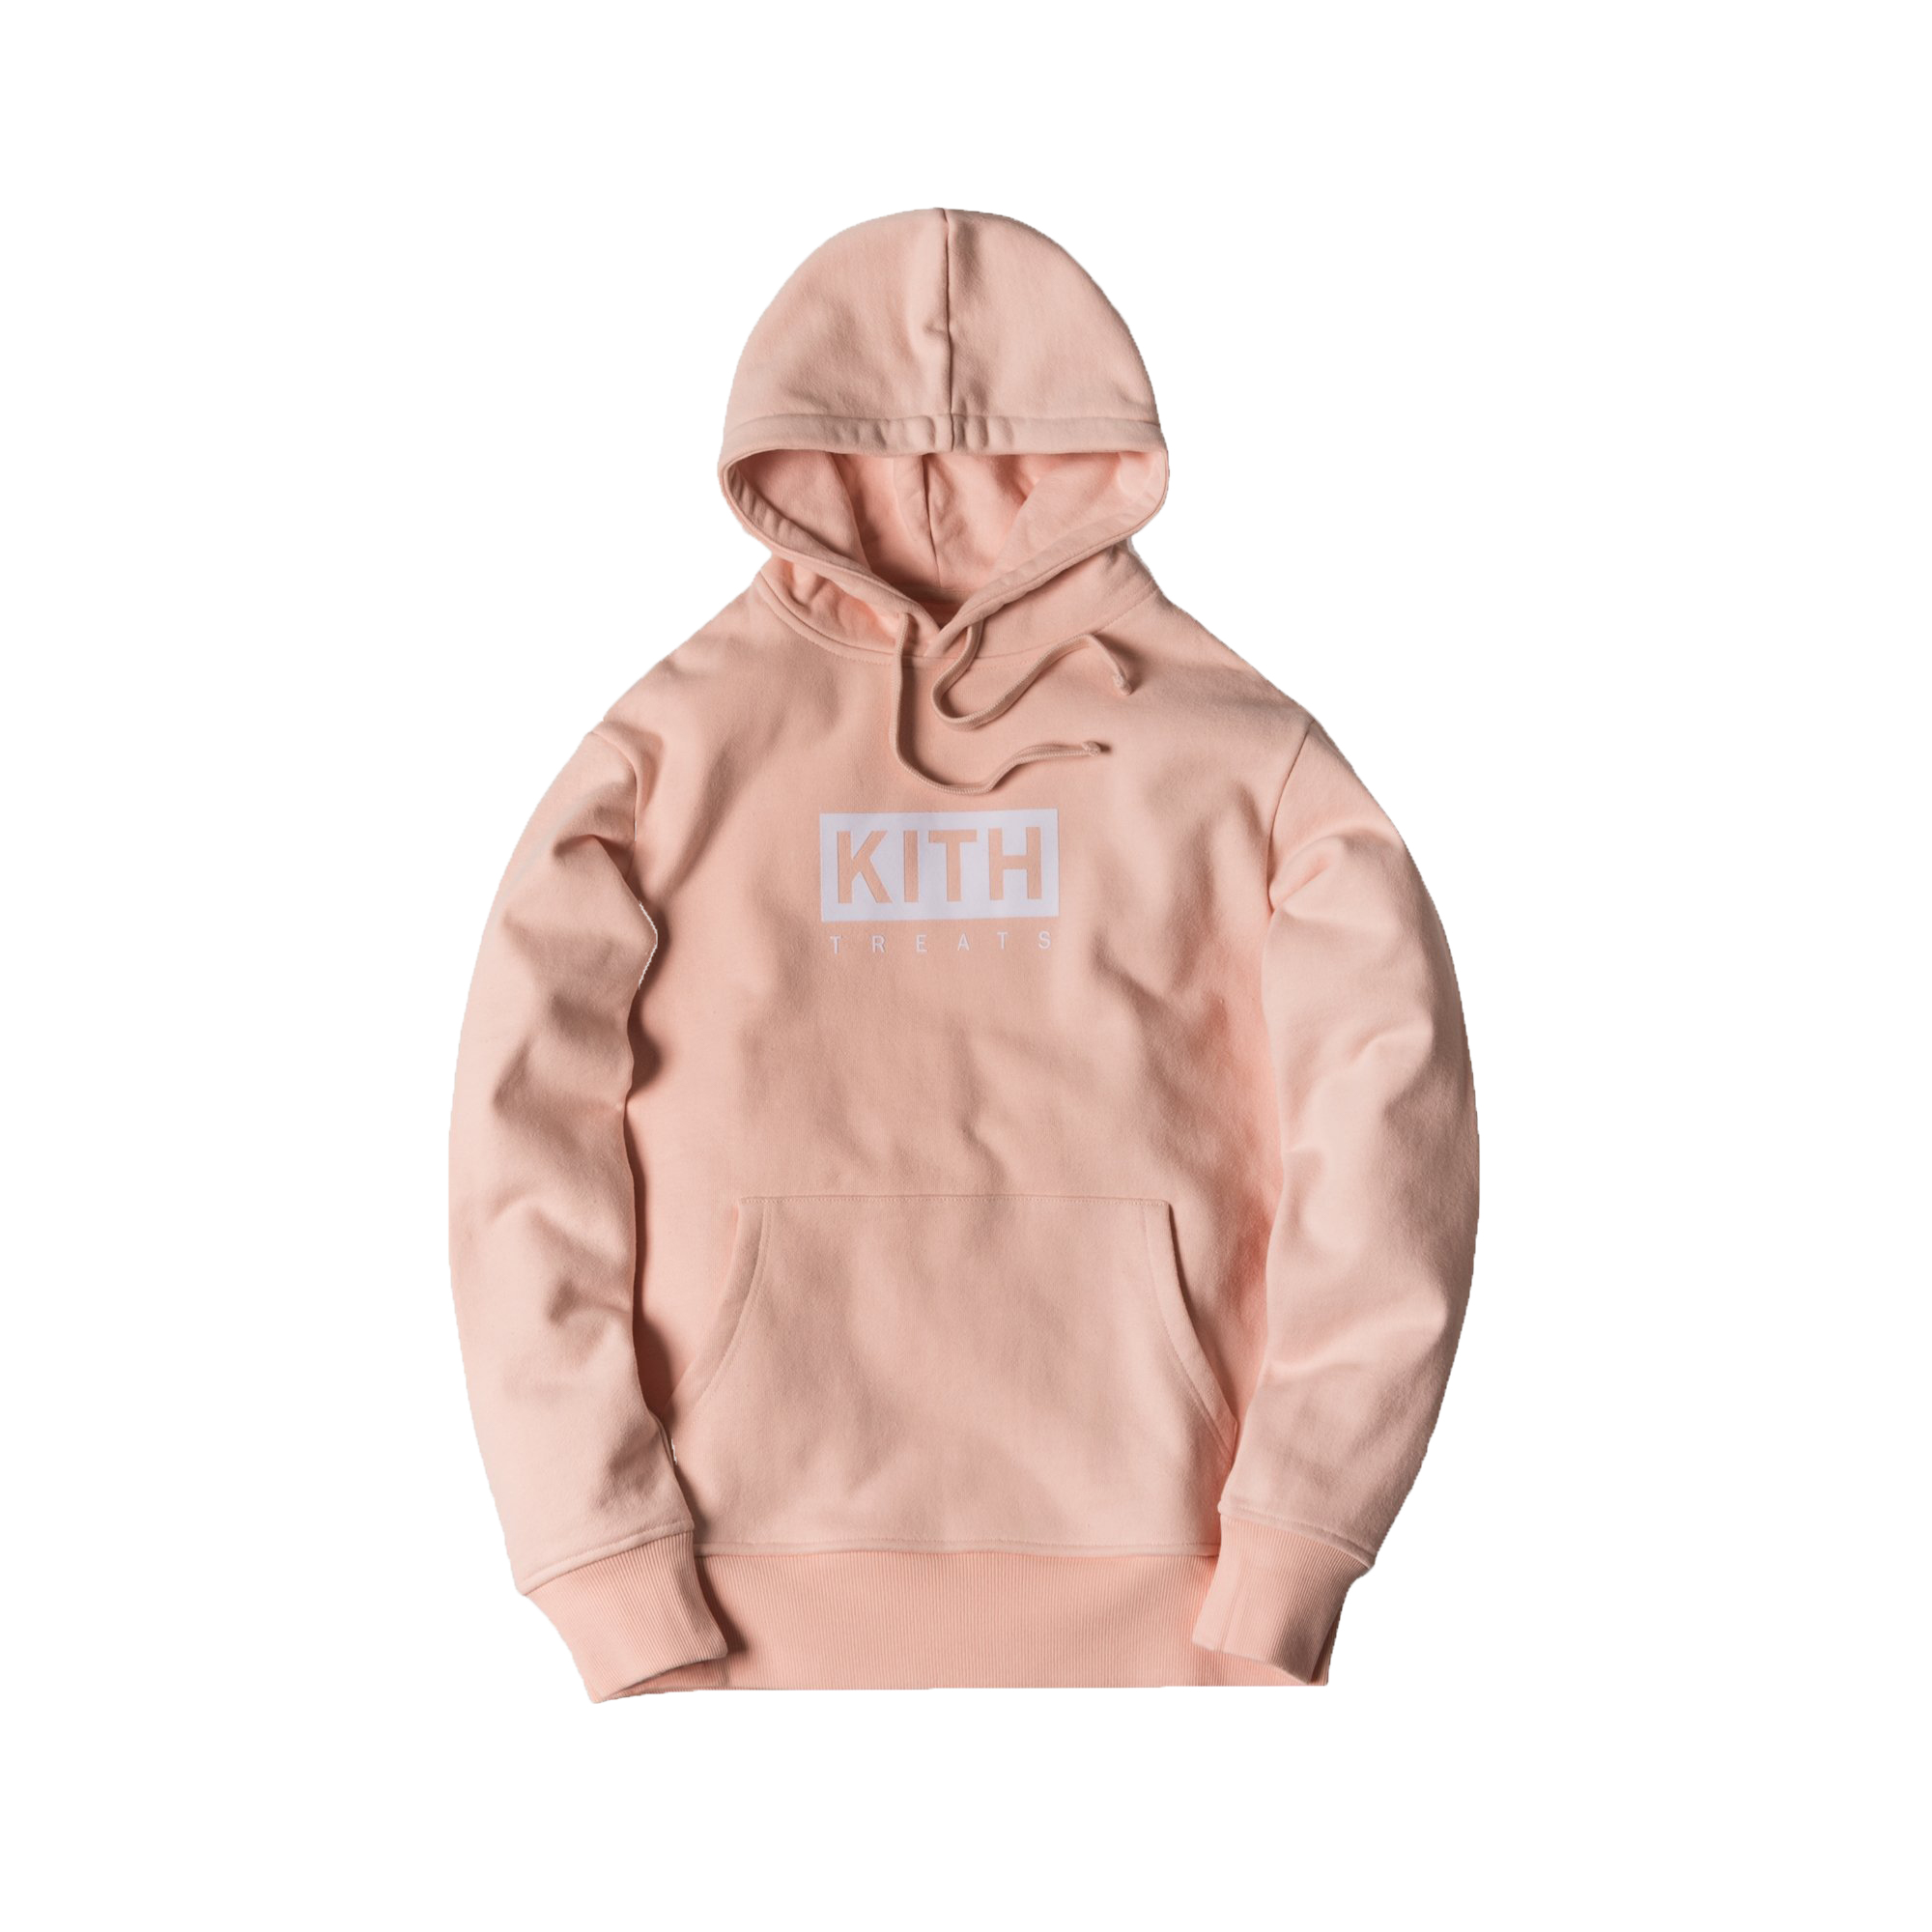 KITH TREATS DELIVERED HOODIE パーカー